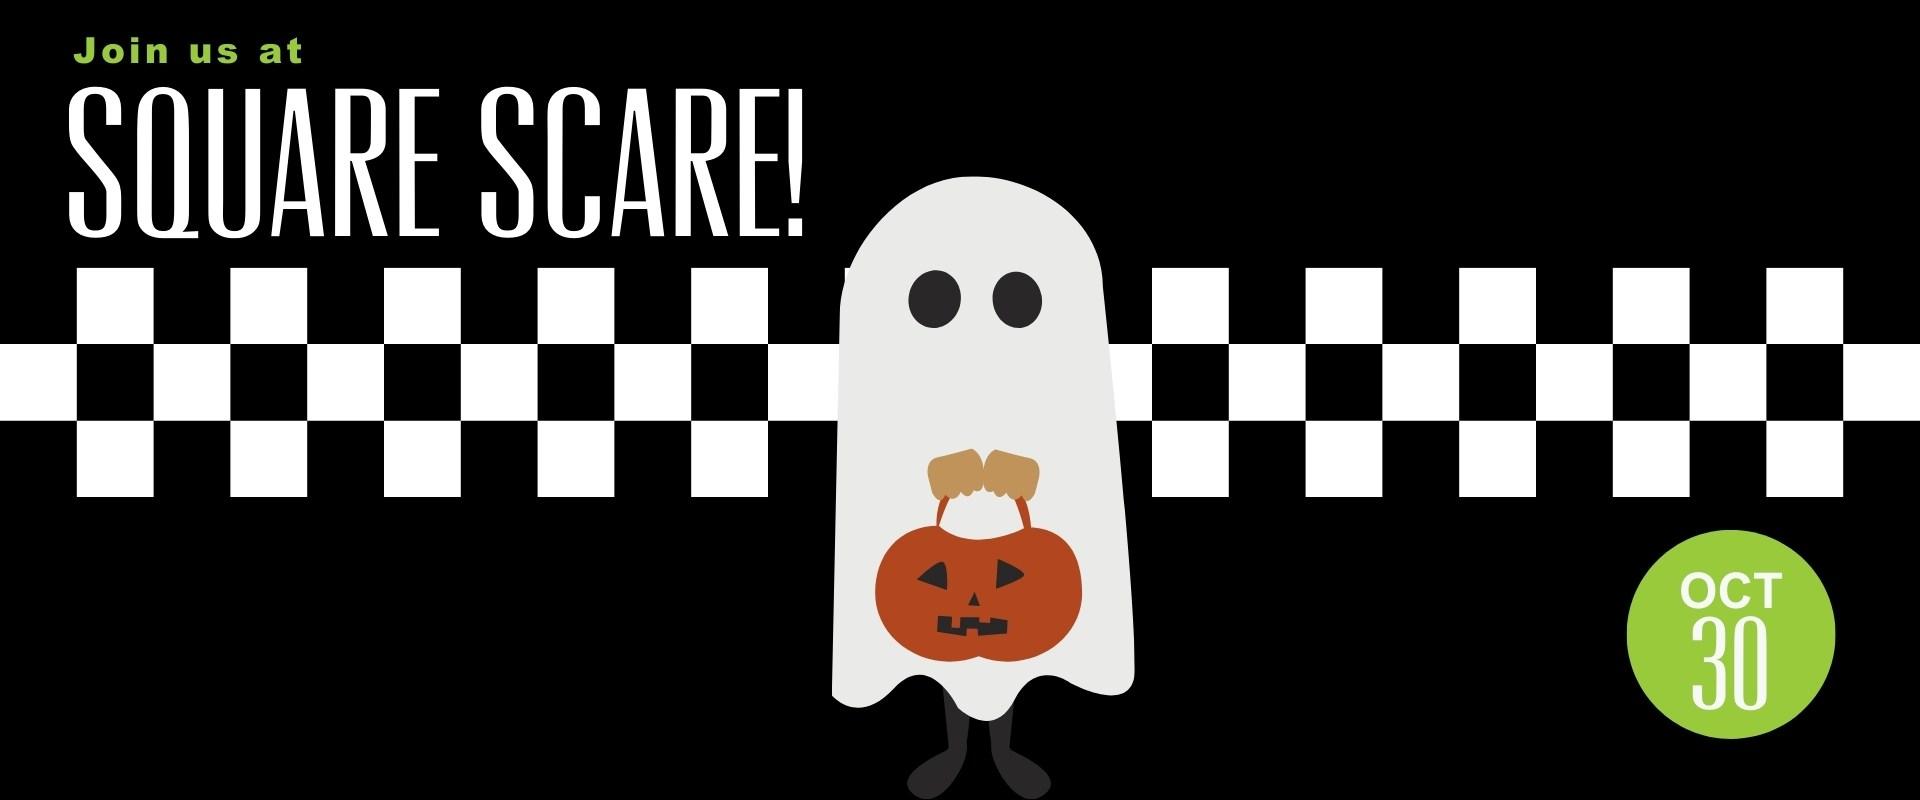 This Graphic shows a ghost illustration with the Square Scare text